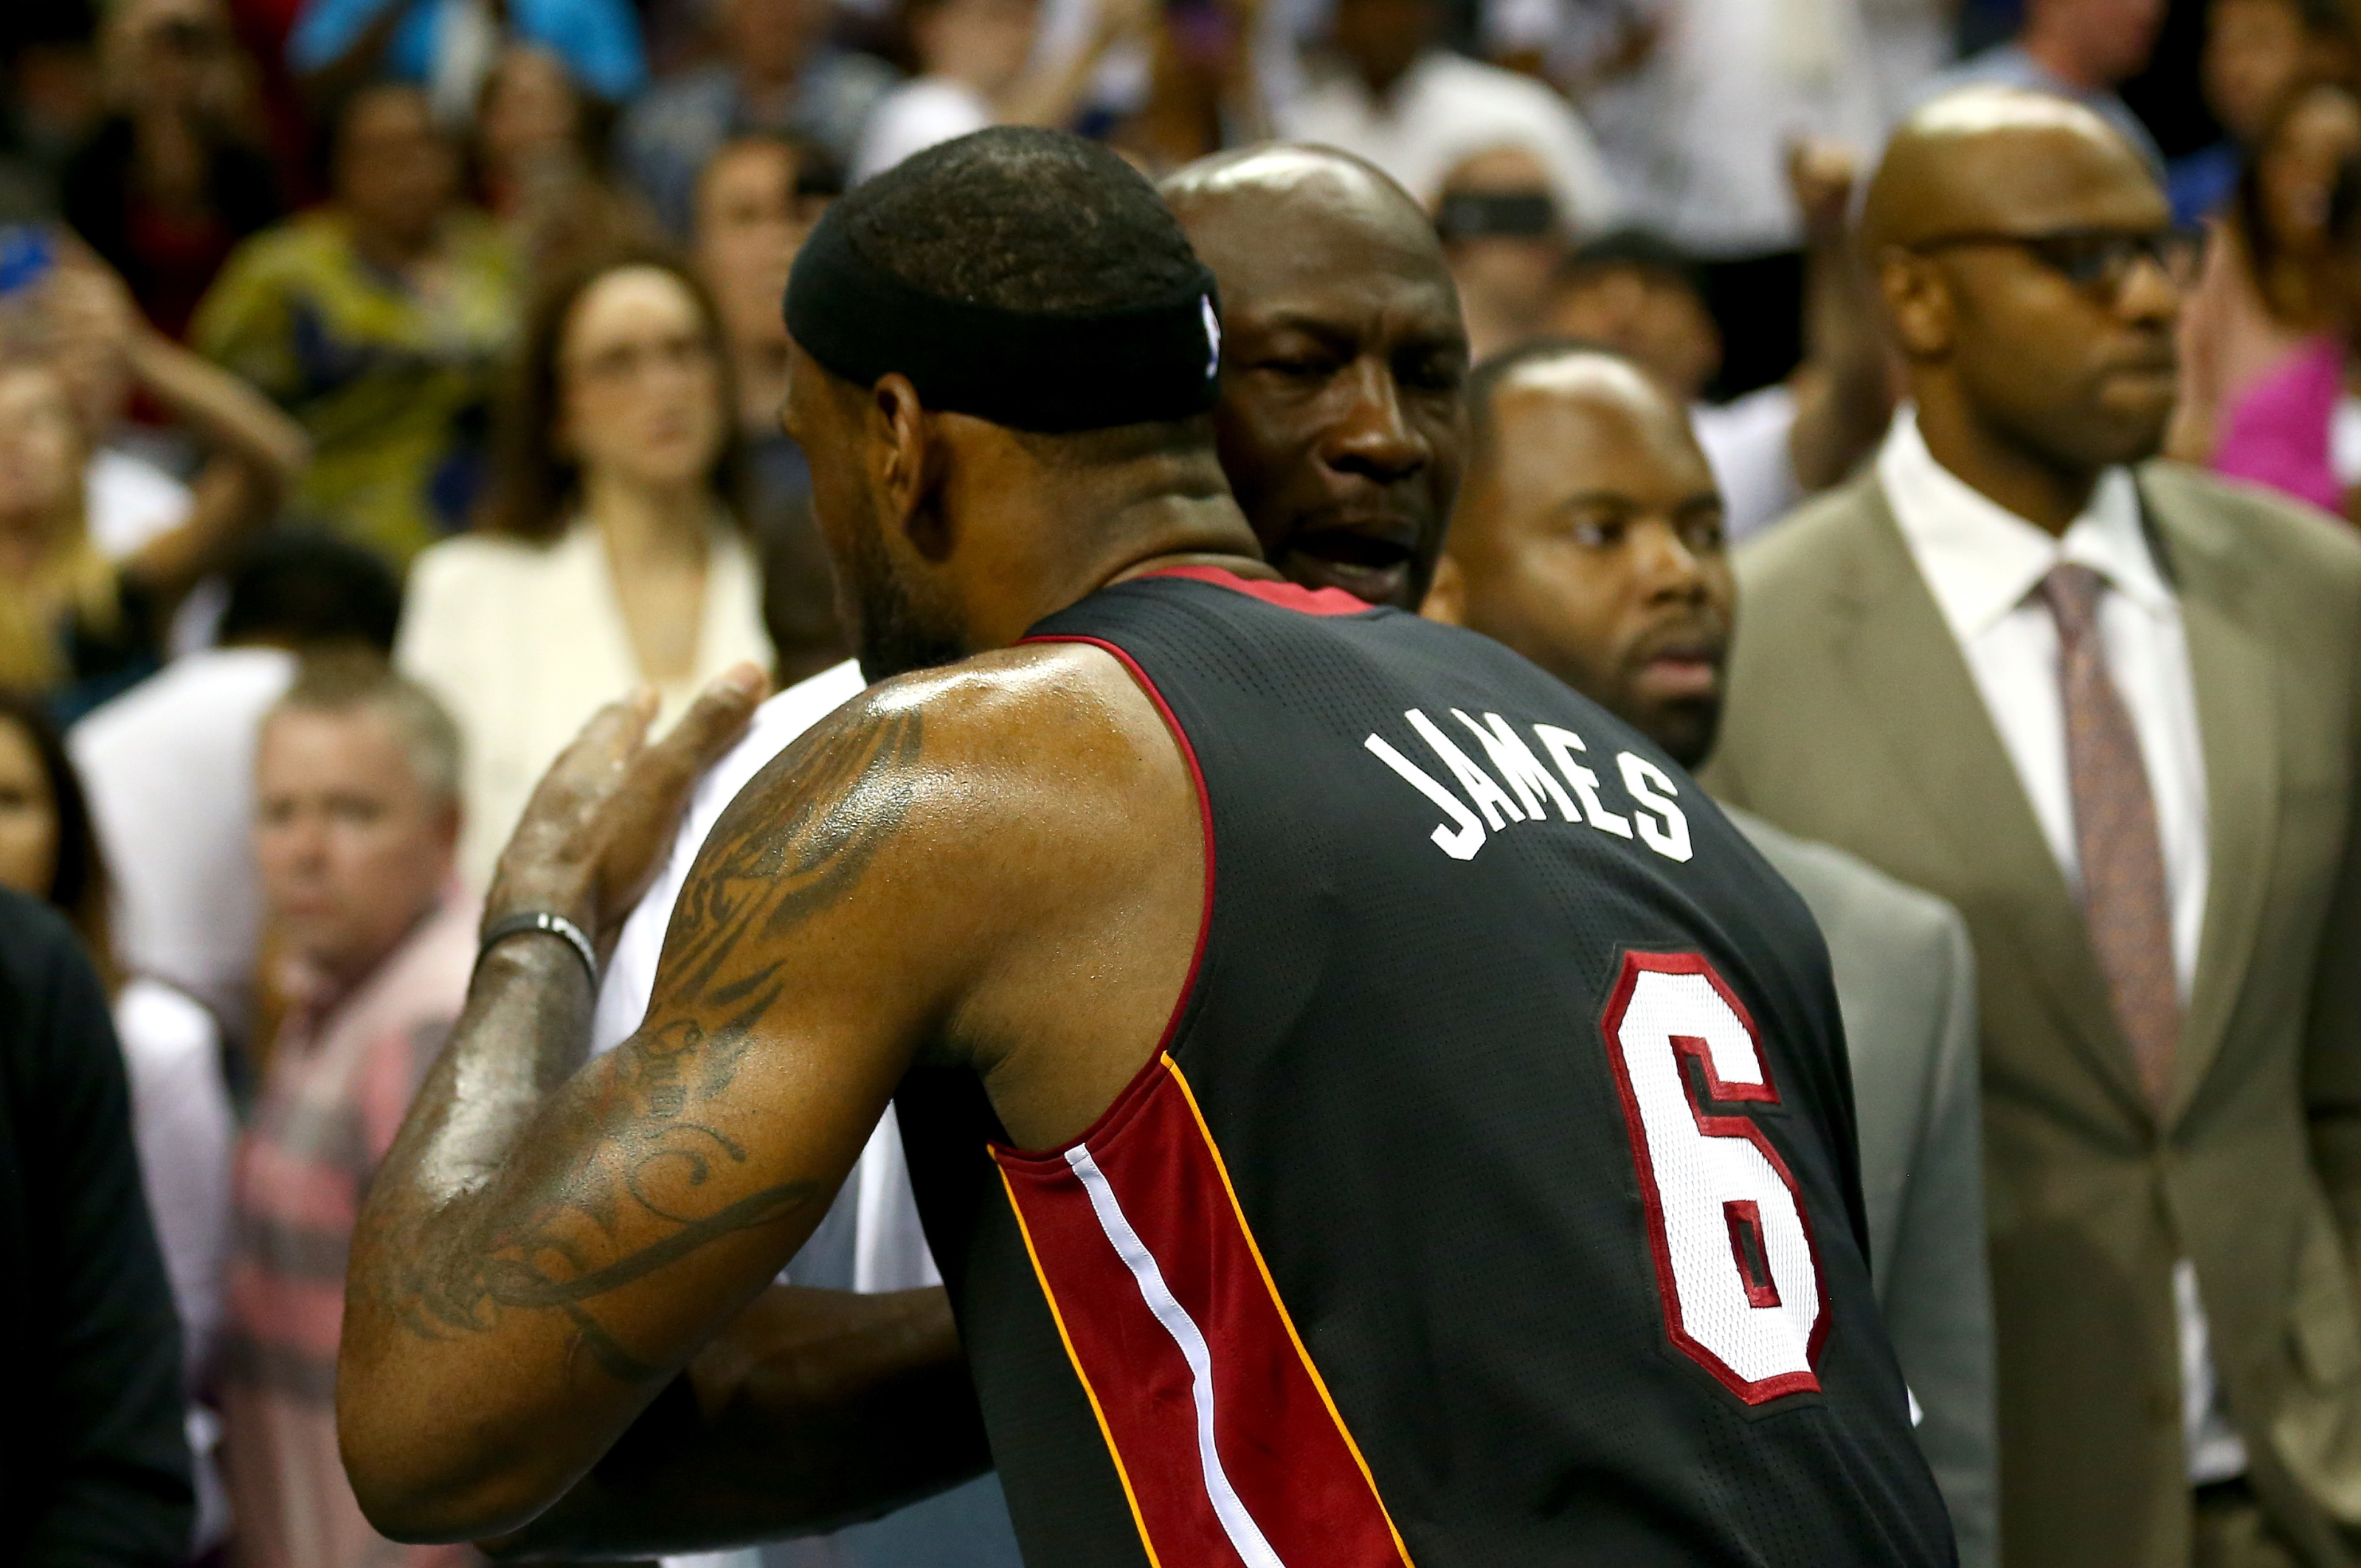 Detroit stands in LeBron's way, just as they did for Michael Jordan